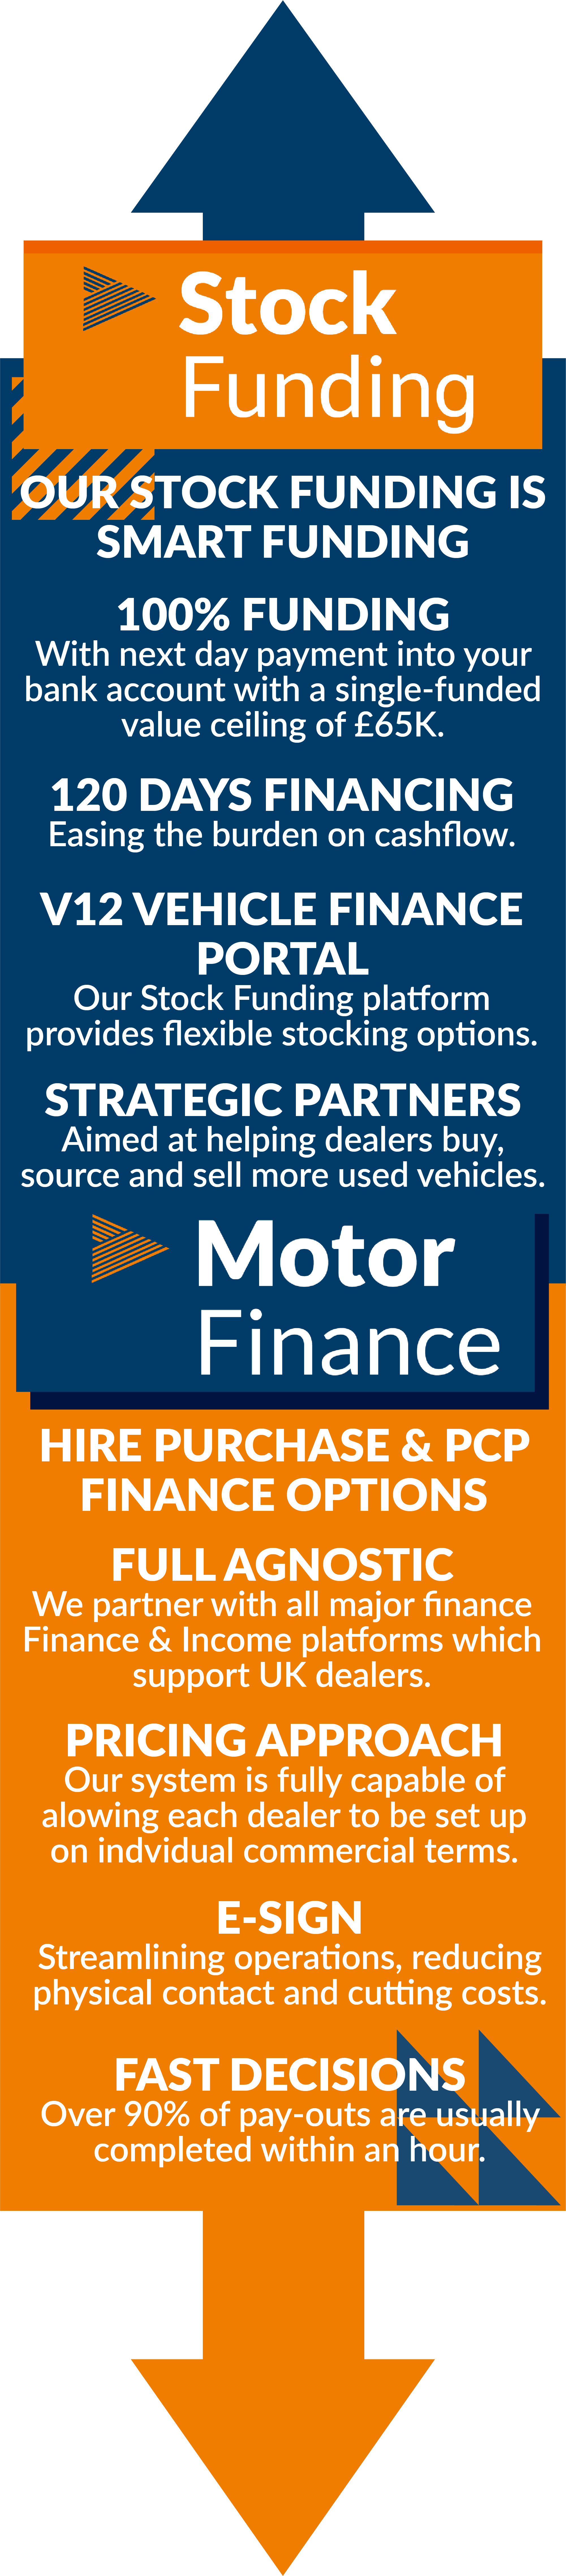 Graphic explaining what C12 Vehicle Finance can do for you. Which reads as follows: Stock Funding. Our stock funding is smart stock funding. 100% funding with next day payment into your bank account with a single-funded value of £65K. 120 days financing easing the burden on cashflow. V12 vehicle finance portal, our stock funding platform provides flexible stocking options. Strategic partners aimed at helping dealers buy, source and sell more used vehicles. Motor finance. Hire purchase and PCP finance options. Full agnostic. We partner with all major finance and income platforms which support UK dealers. Pricing approach, out system is fully capable of allowing each dealer to be set up on individual commercial terms. E-sign, streamlining operations, reducing physical contact and cutting costs. Fast decisions, over 90% of pay-outs are usually completed within an hour.  